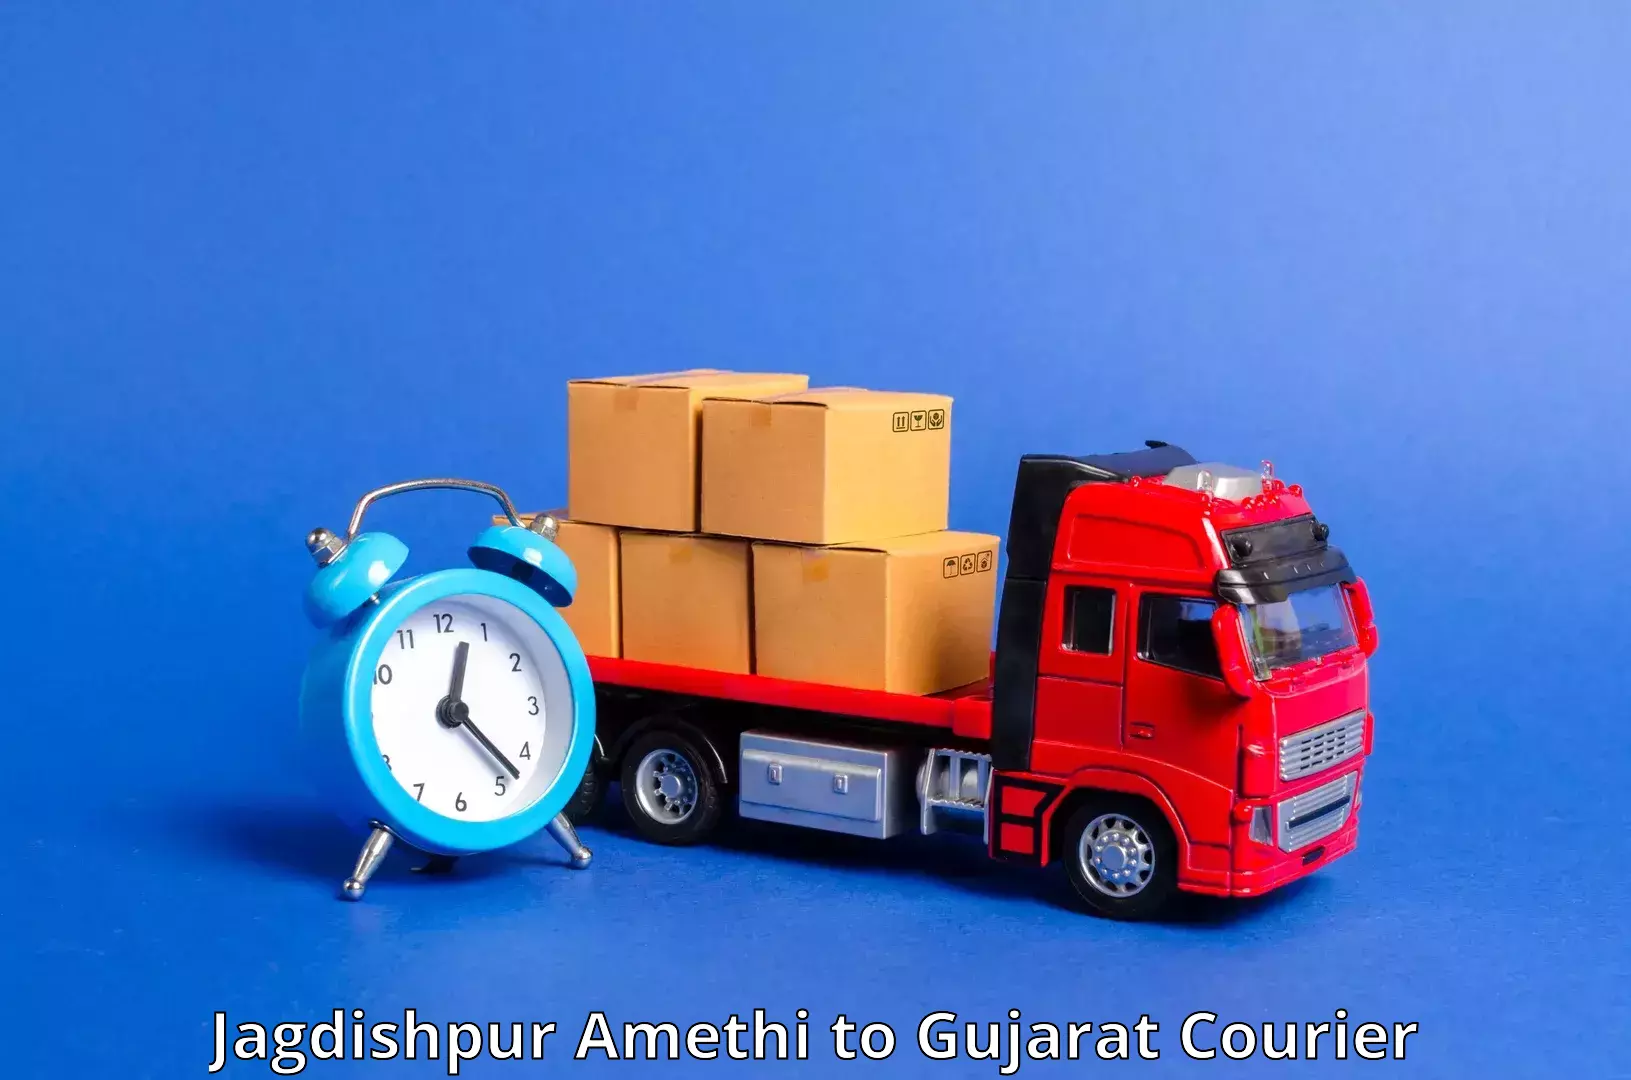 Small business couriers Jagdishpur Amethi to Kachchh